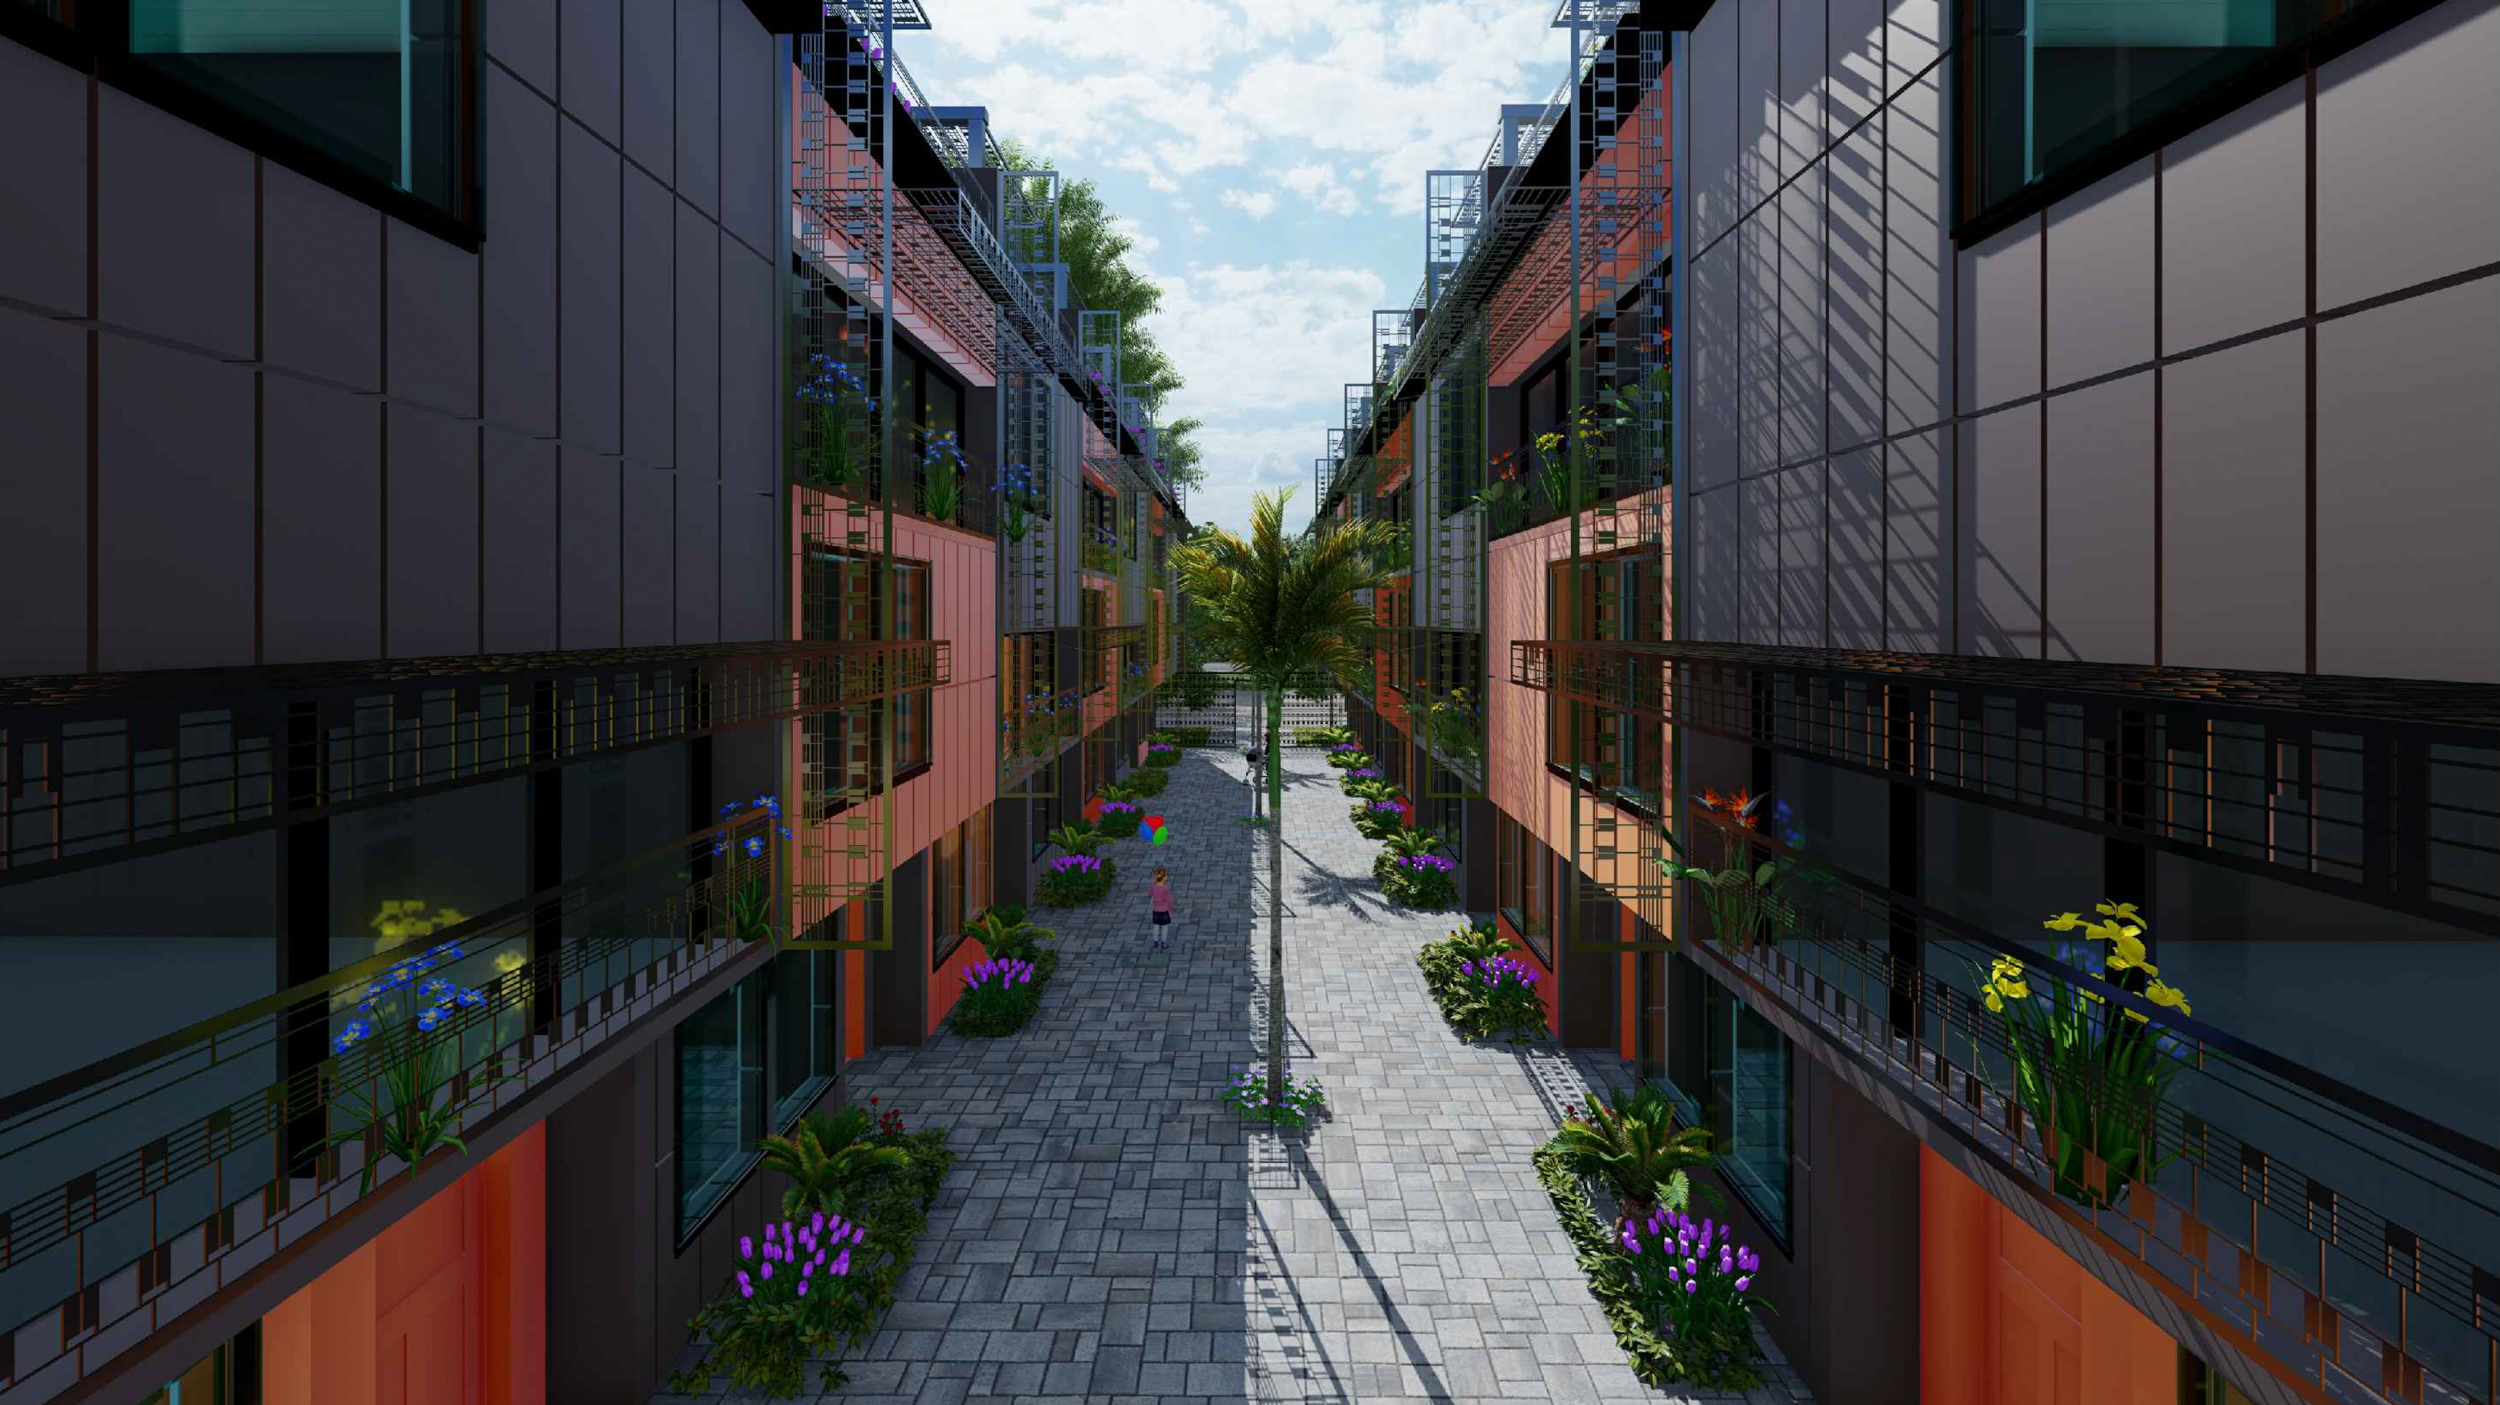 1517 E Street inner-building pathway, rendering by H&H Consultant Engineering